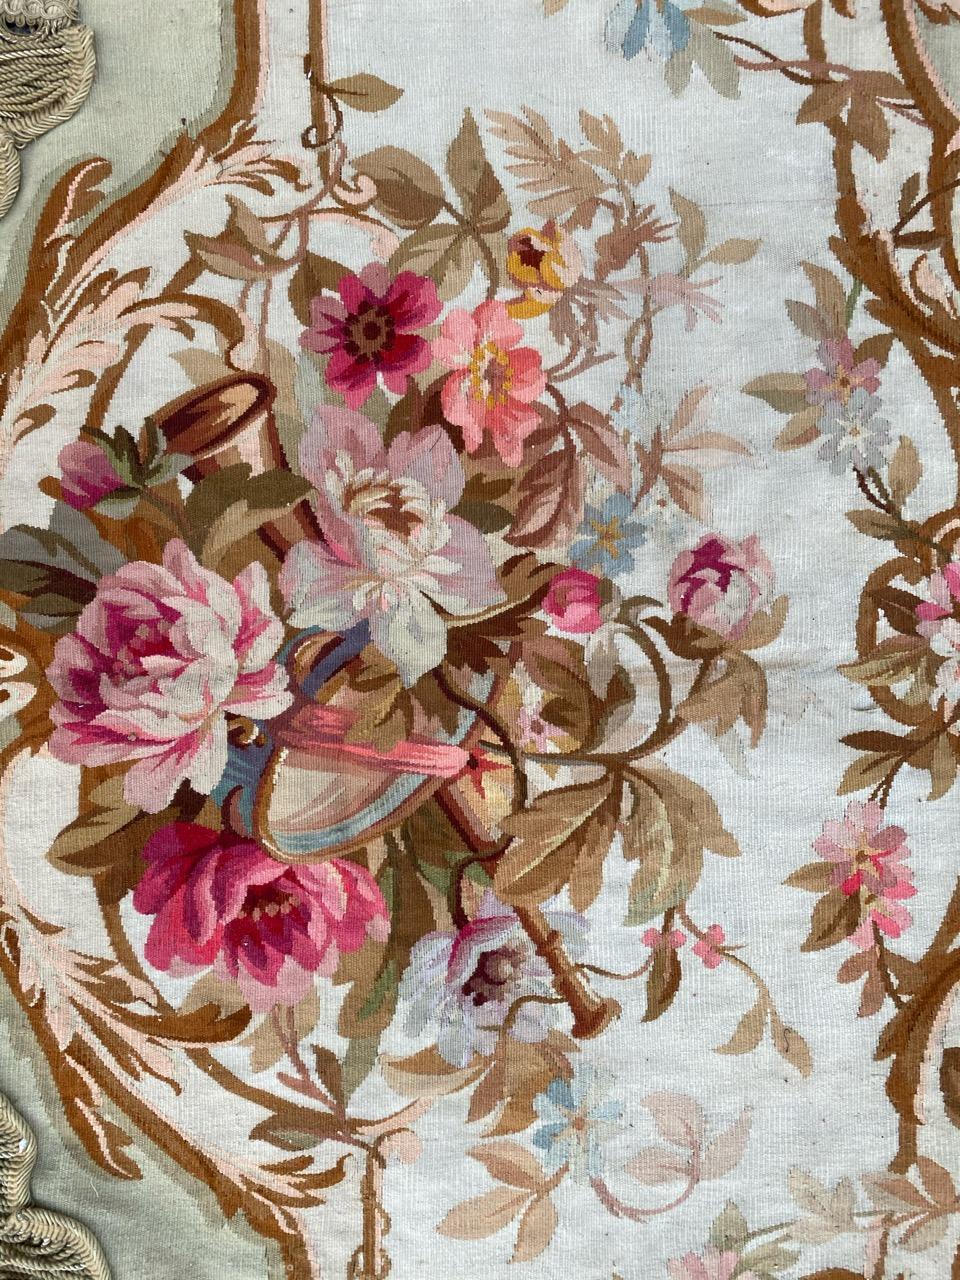 Very beautiful late 19th century Aubusson Valence tapestry from Napoleon the third period, with nice floral design and beautiful colors, entirely and finely handwoven with wool and silk.

✨✨✨
